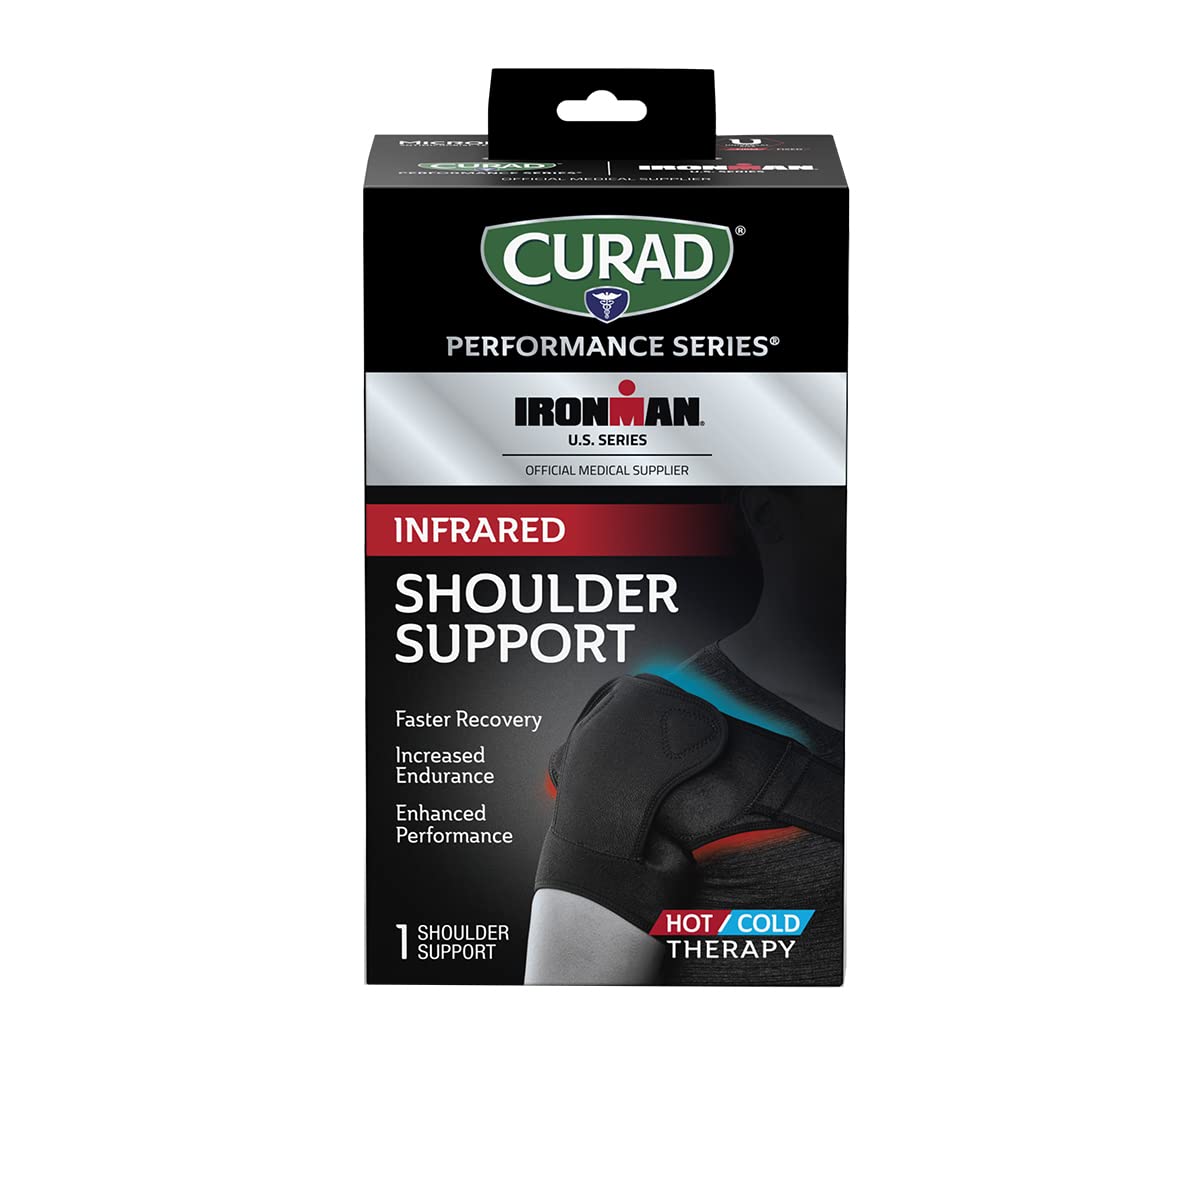 CURAD Performance Series IRONMAN Infrared Shoulder Support, Hot/Cold, Universal, 1 count, Powered by CELLIANT®, black